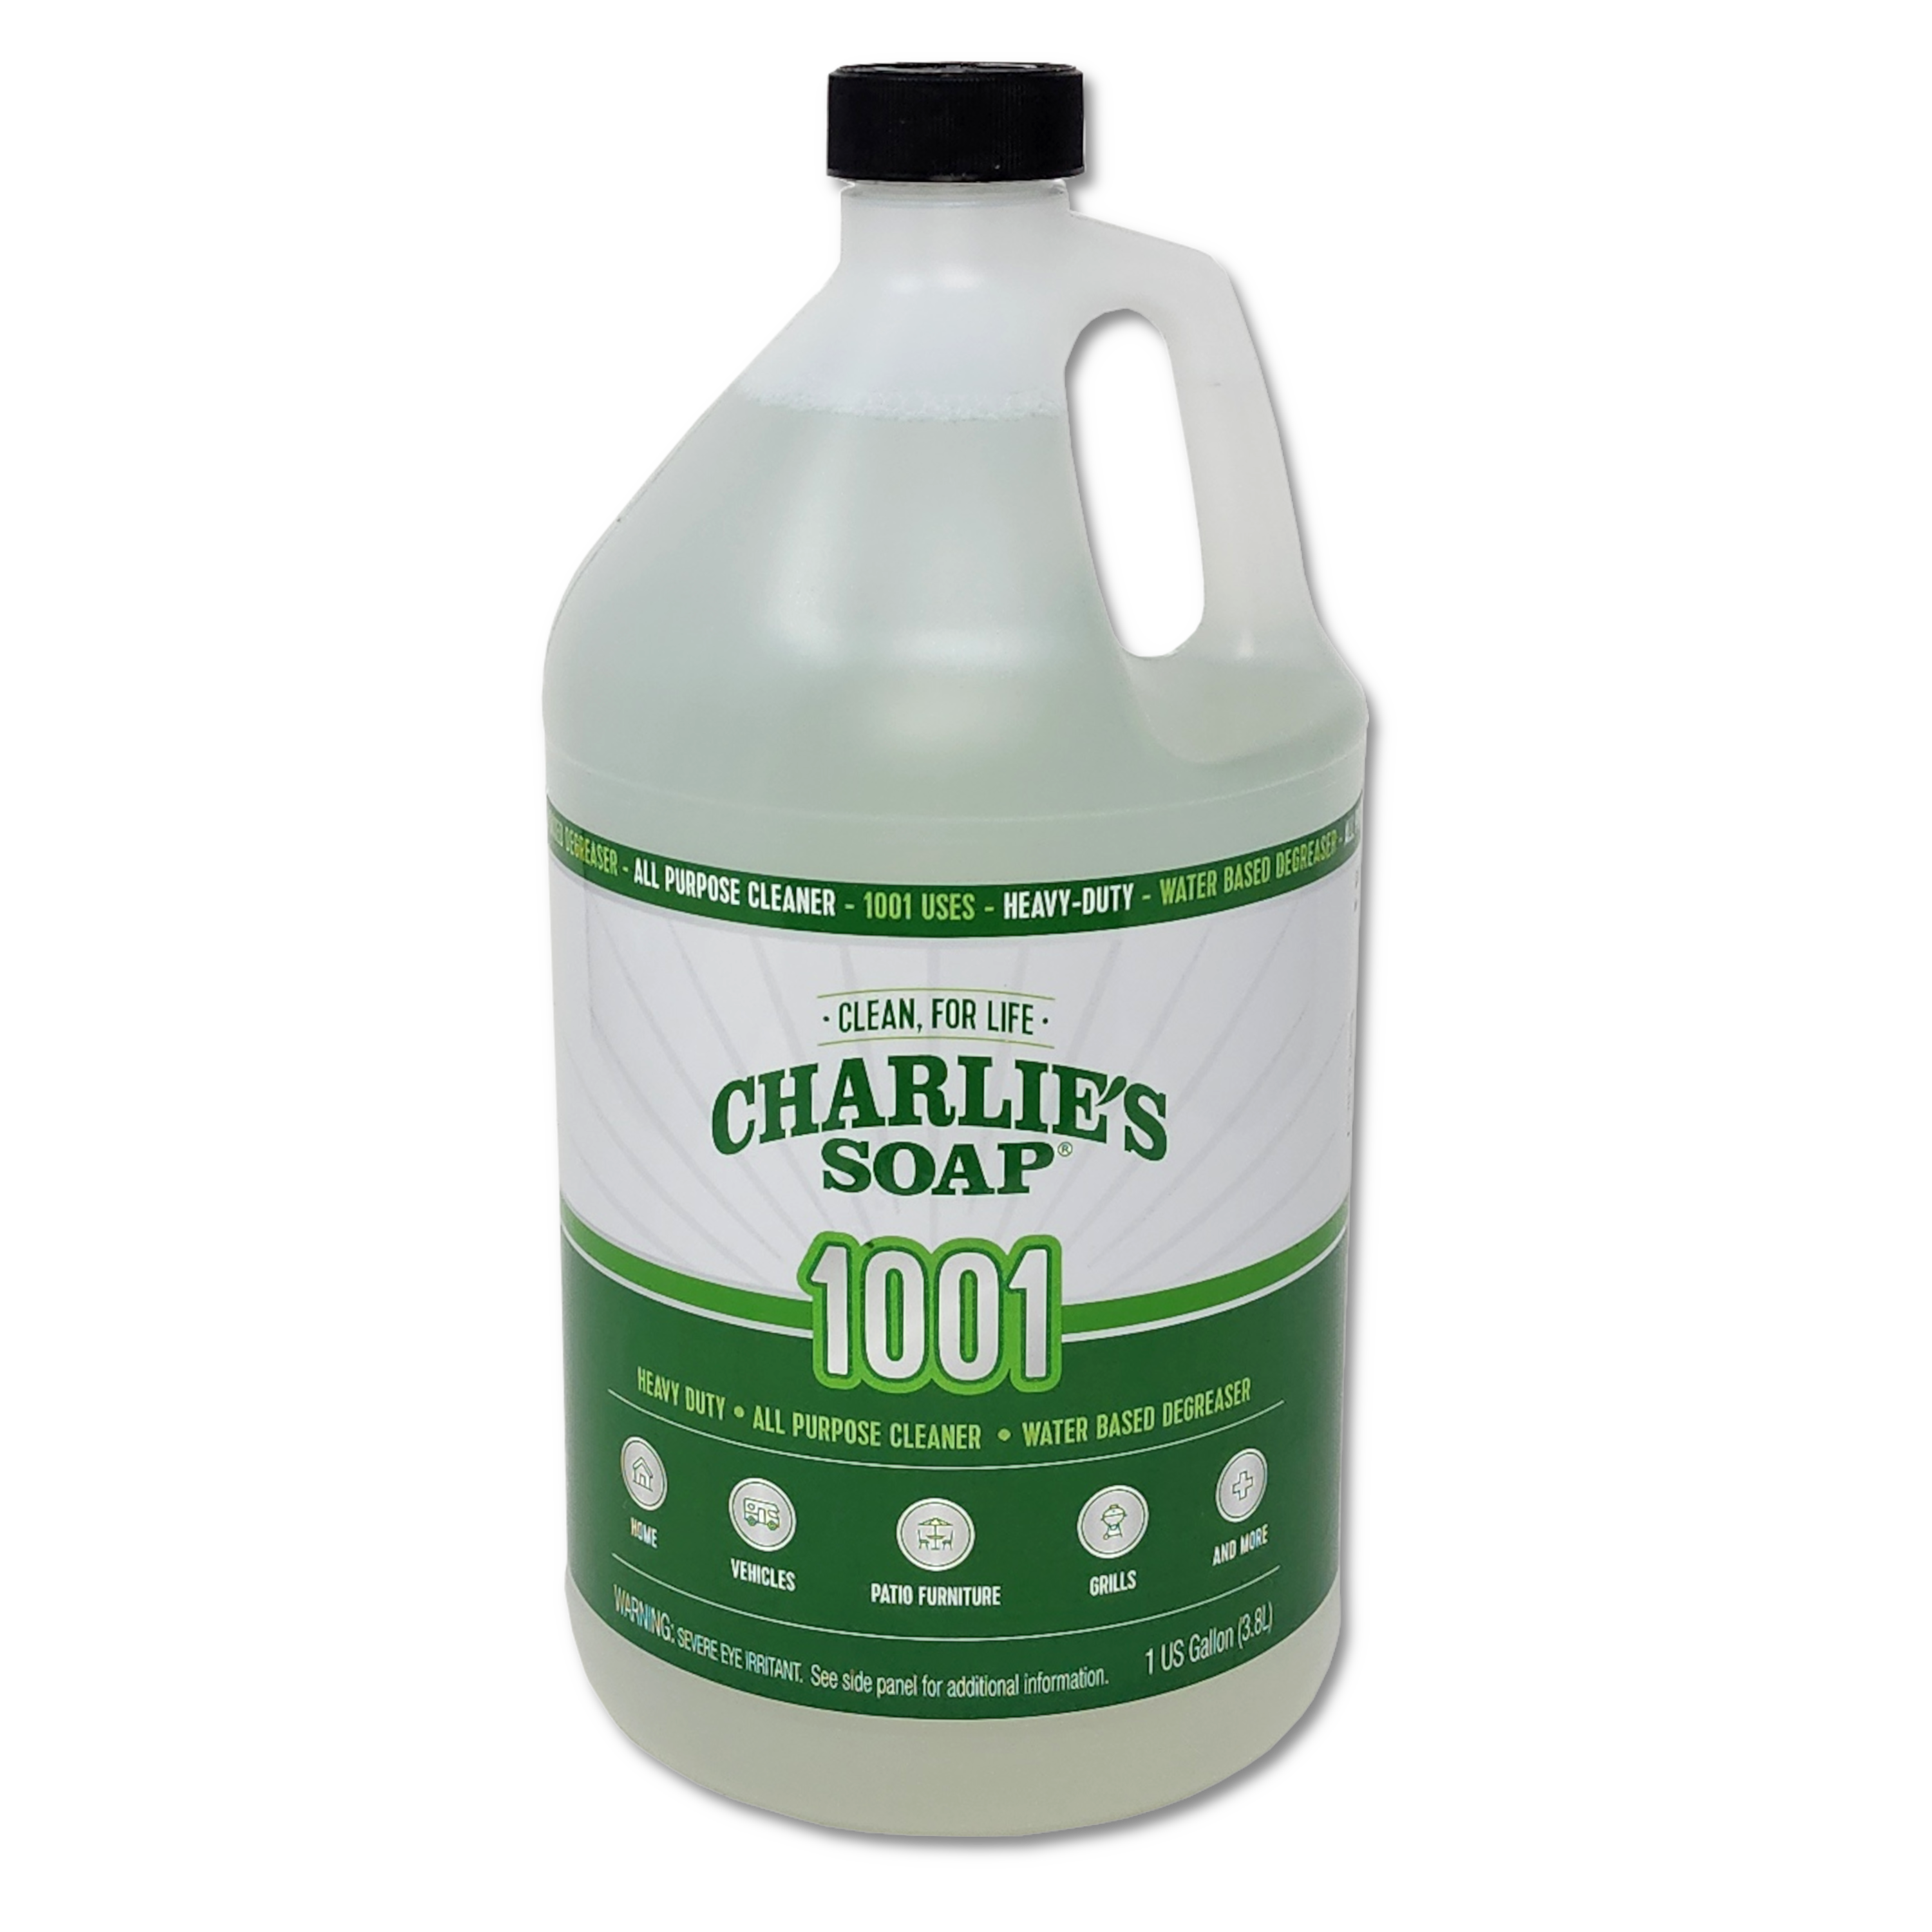 Tough Green Cleaner & Degreaser Concentrate - 1 gallon